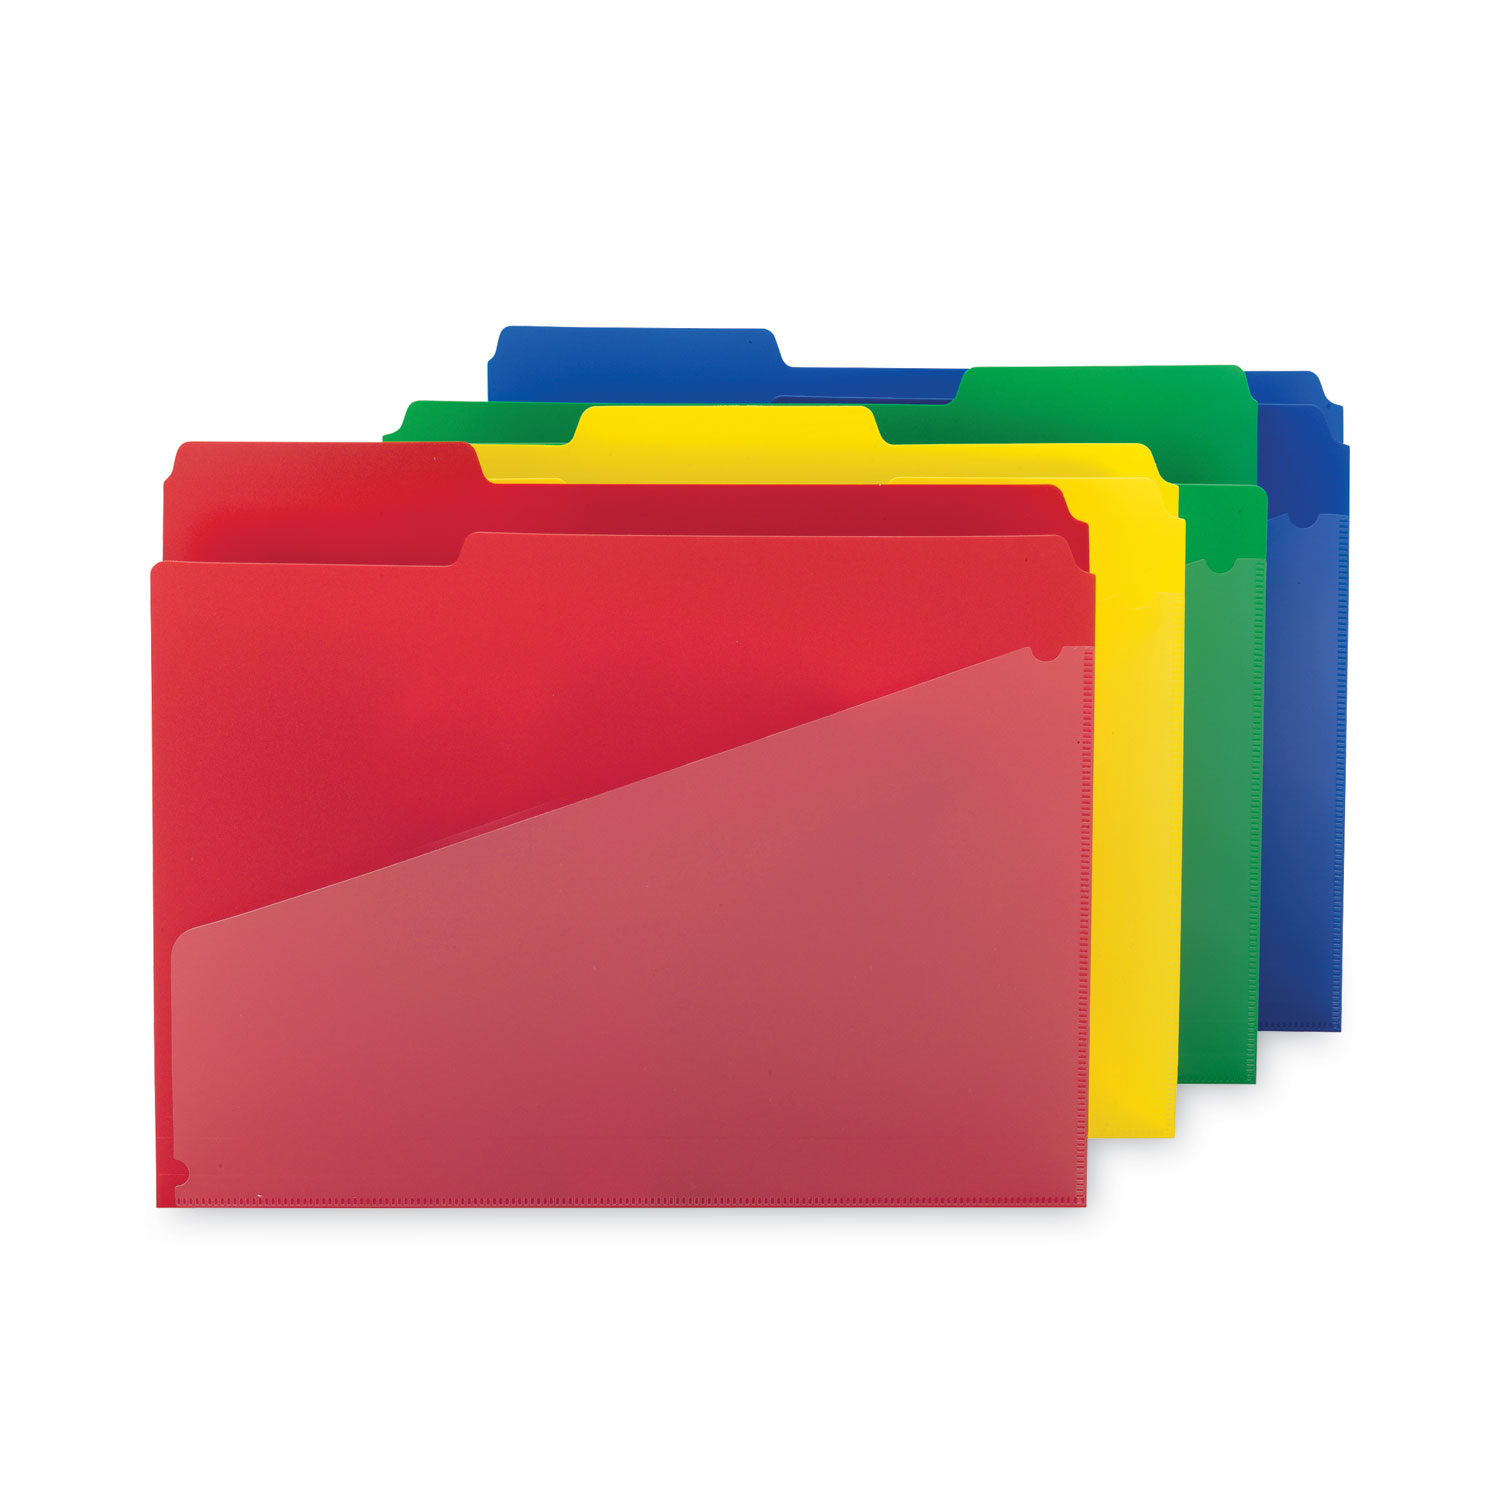 Shop - Paper Products - Folders & Tax Supplies - Presentation